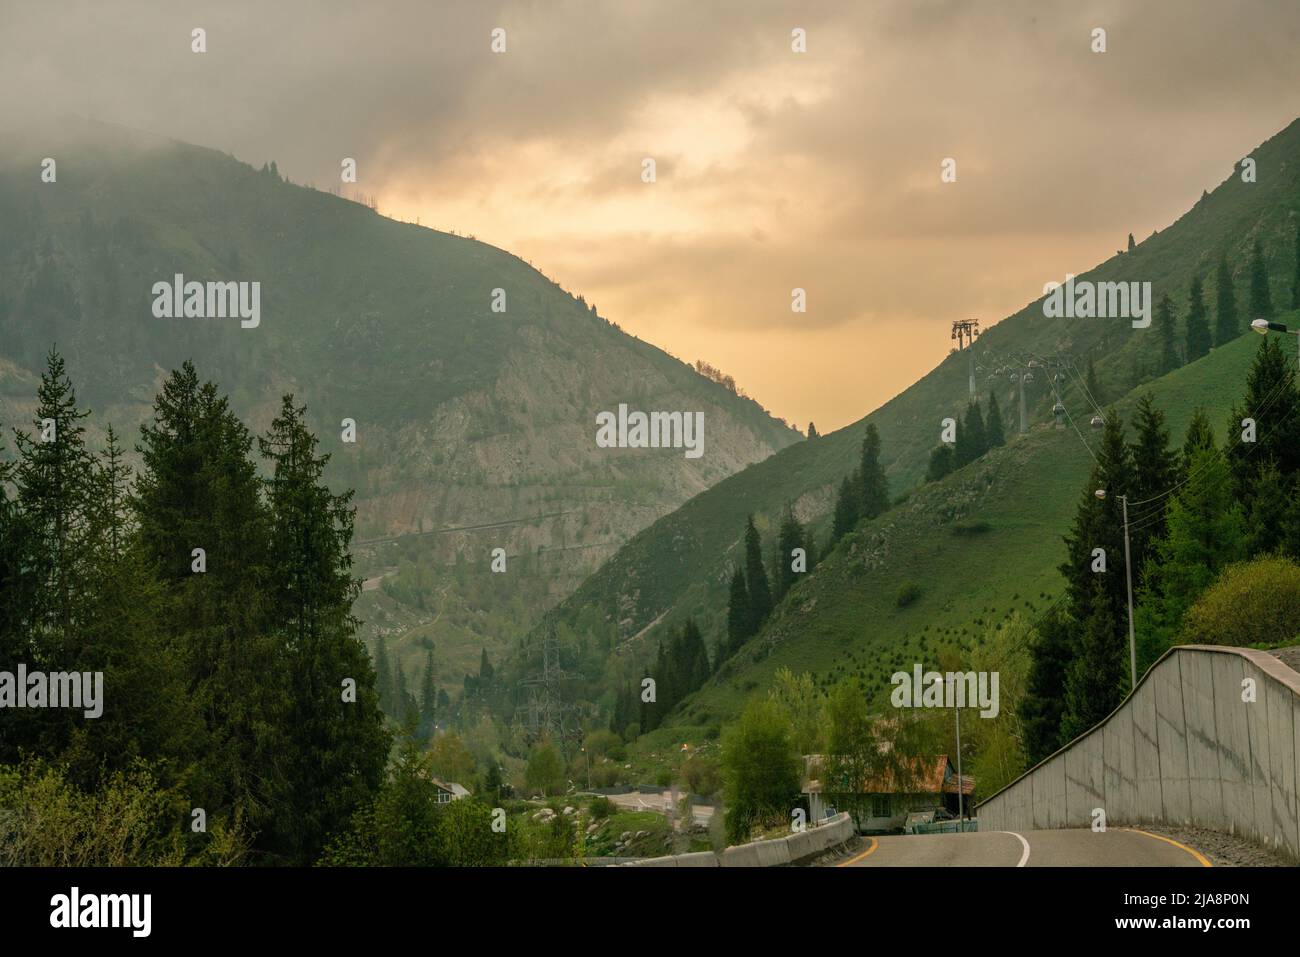 Idyllic landscape with cable car  and road  to Kazakh mountain resort 'Shymbulak' a bit foggy in sprinю Amazing  spruce forest in  of Ile-Alatau Natio Stock Photo